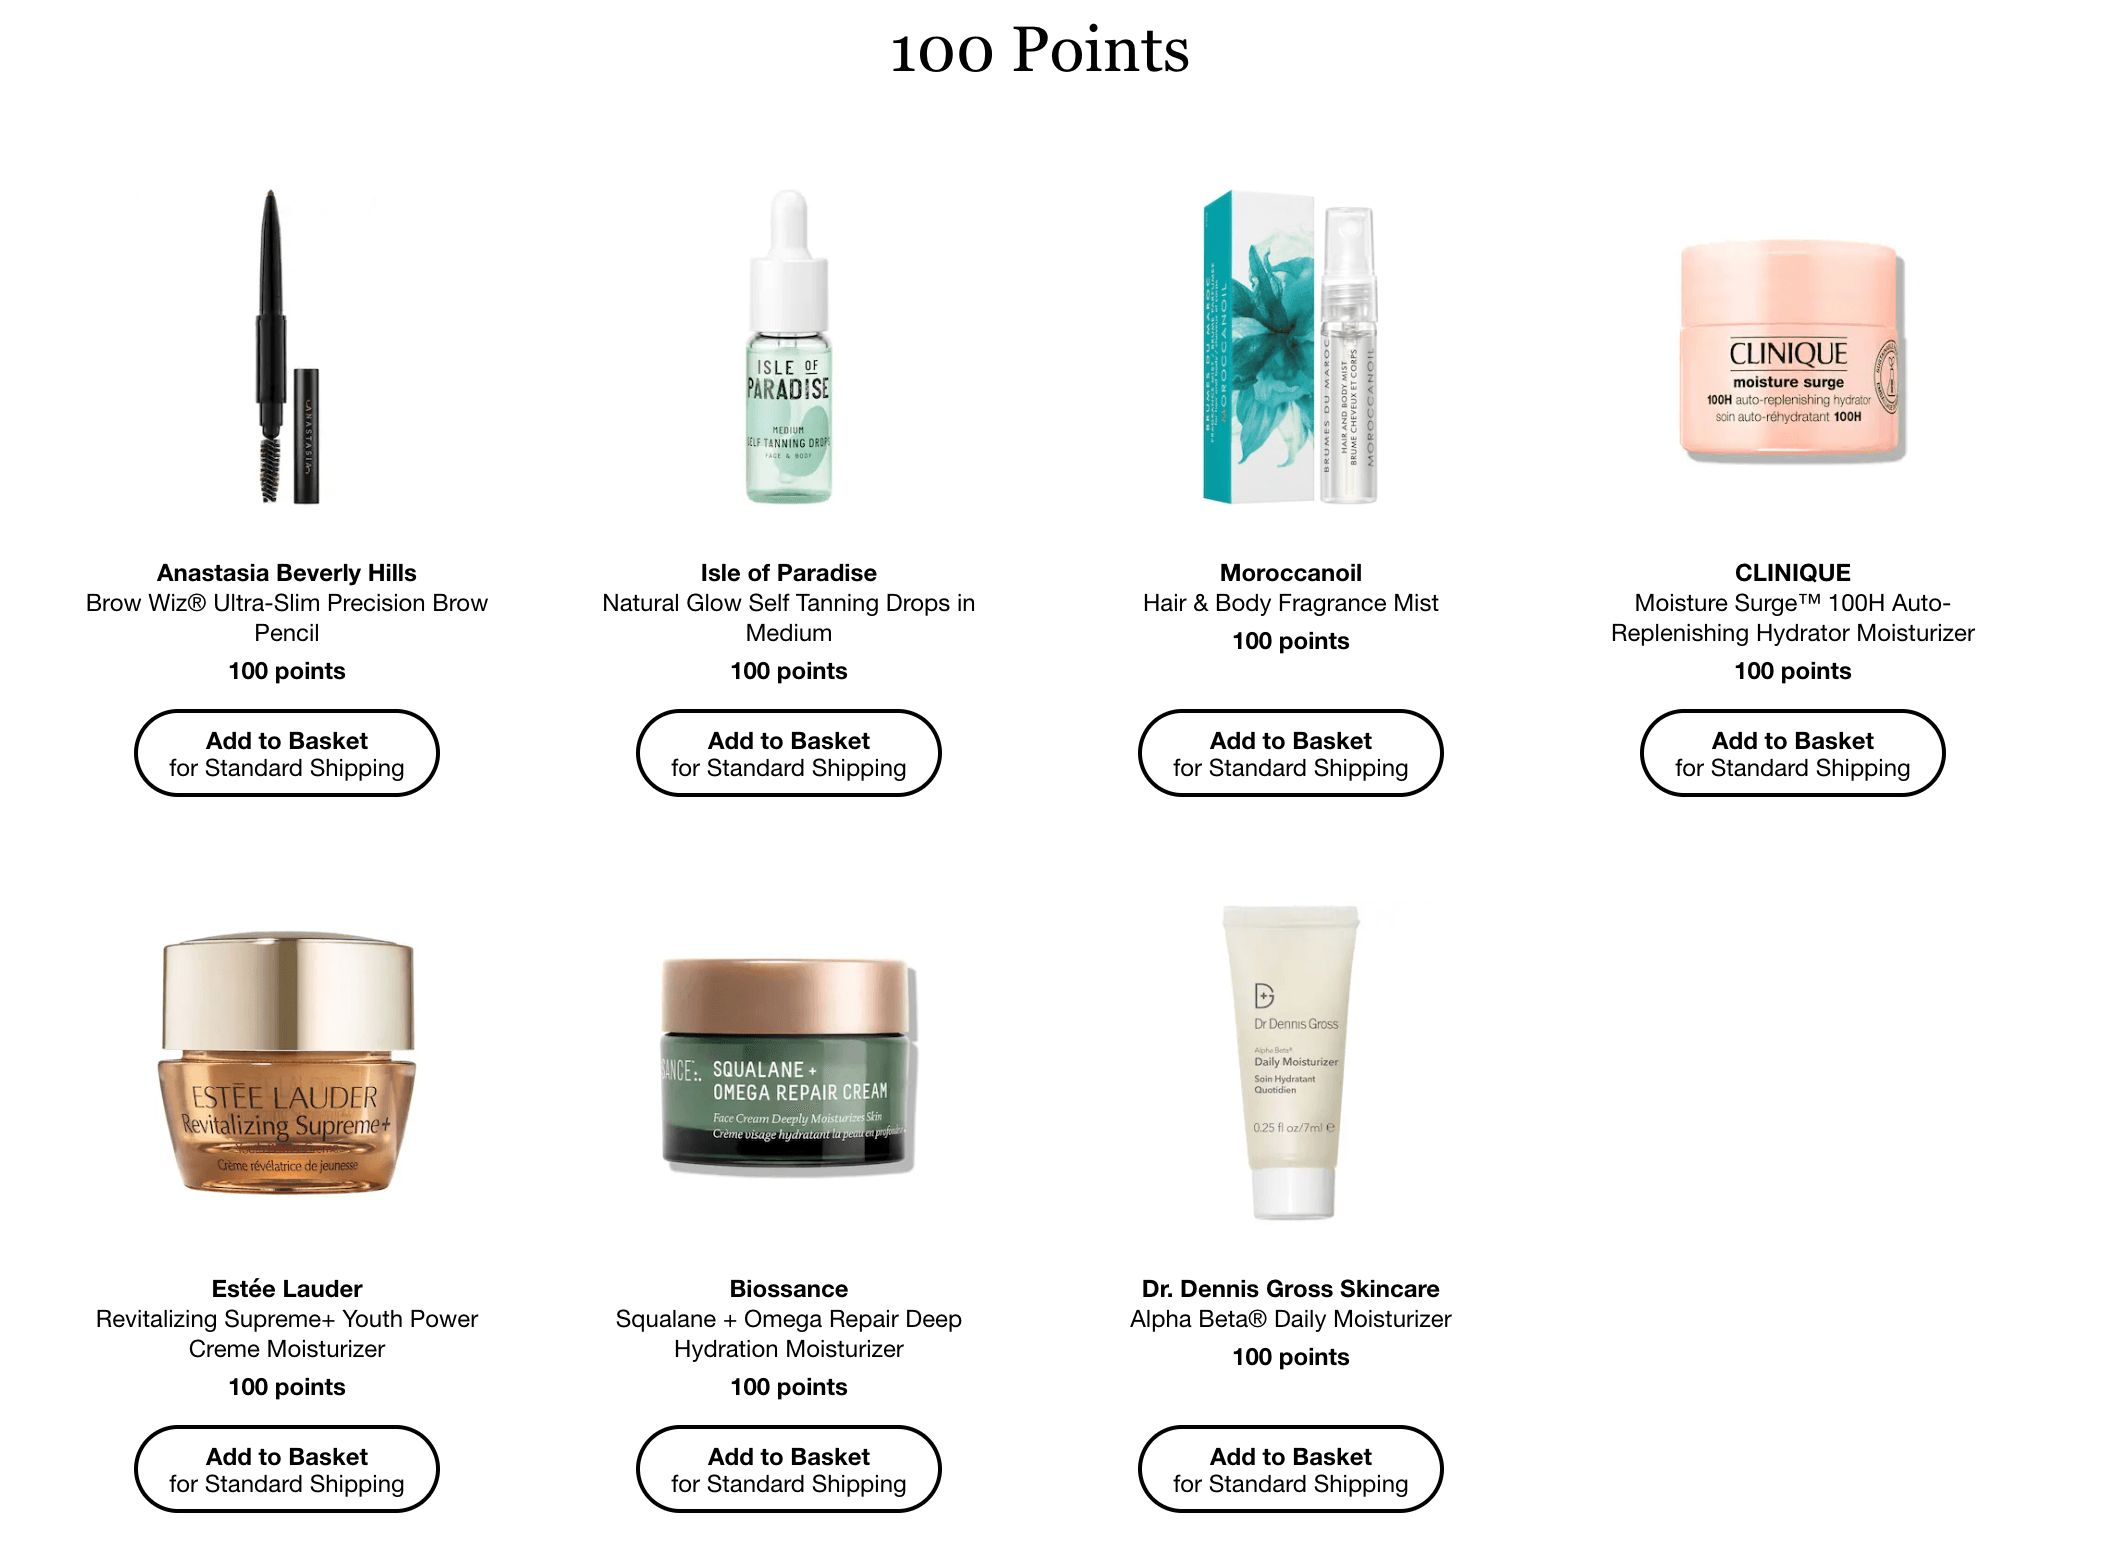 A screenshot from Sephora’s website showing the rewards redeemable for 100 points. There is an image of each product with a brief description below. The products are Anastasia Beverly Hills Brow Wiz Ultra-Slim Precision Brow Pencil, Isle of Paradise Natural Glow Self Tanning Drops in Medium, Moroccanoil Hair and Body Fragrance Mist, Clinique Moisture Surge 100H Auto-Replenishing Hydrator Moisturizer, Estée Lauder Revitalizing Supreme+ Youth Power Creme Moisturizer, Biossance Squalane Omega Repair Deep Hydration Moisturizer, and Dr. Dennis Gross Skincare Alpha Beta Daily Moisturizer. 